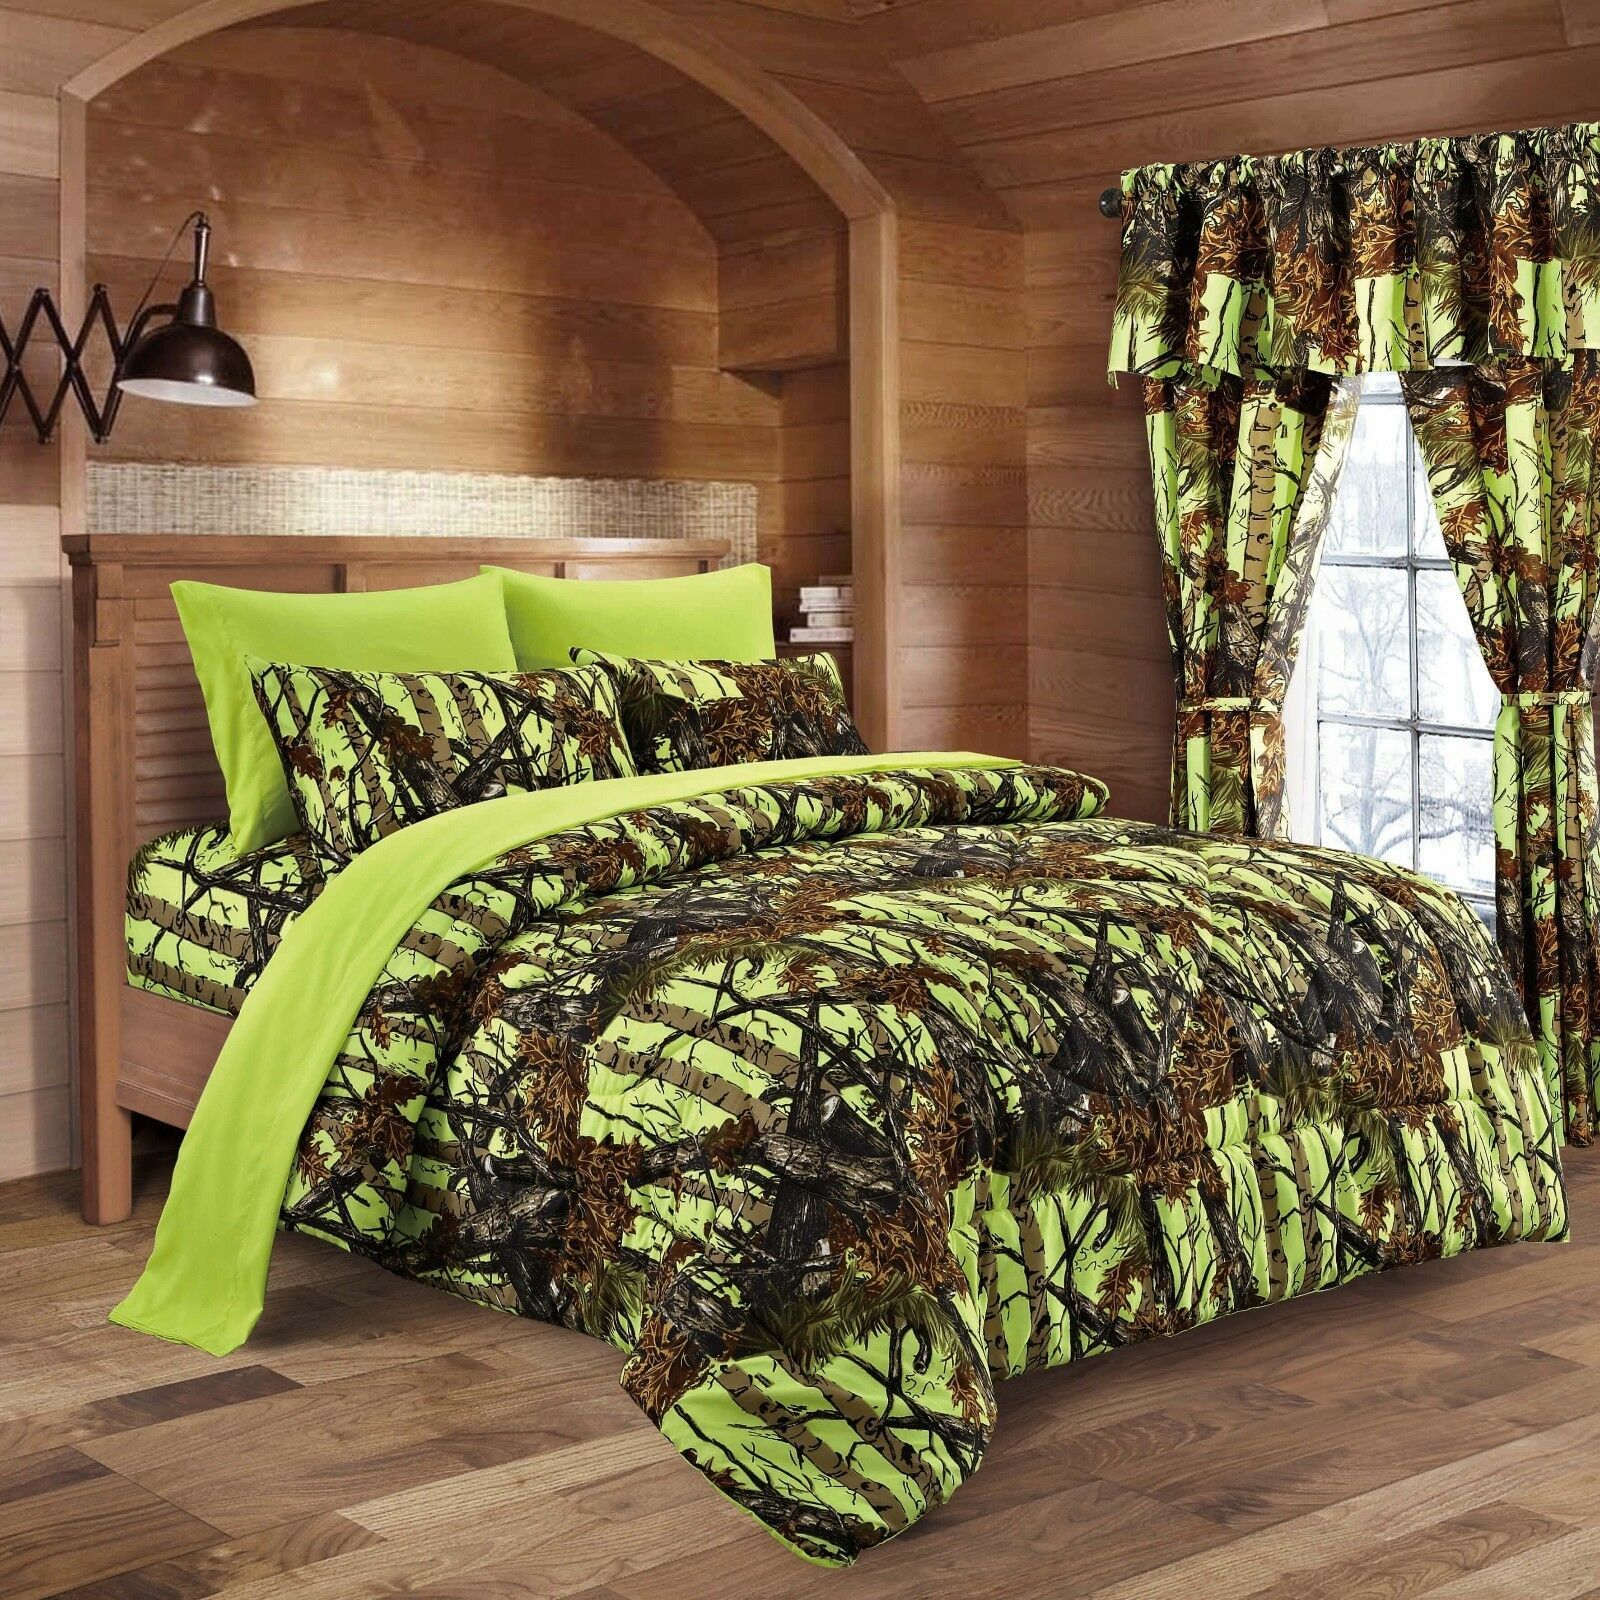 Primary image for 9 PC COMFORTER SET with SHEETS PILLOWCASES LIME CAMO KING CAMOUFLAGE NEON YELLOW